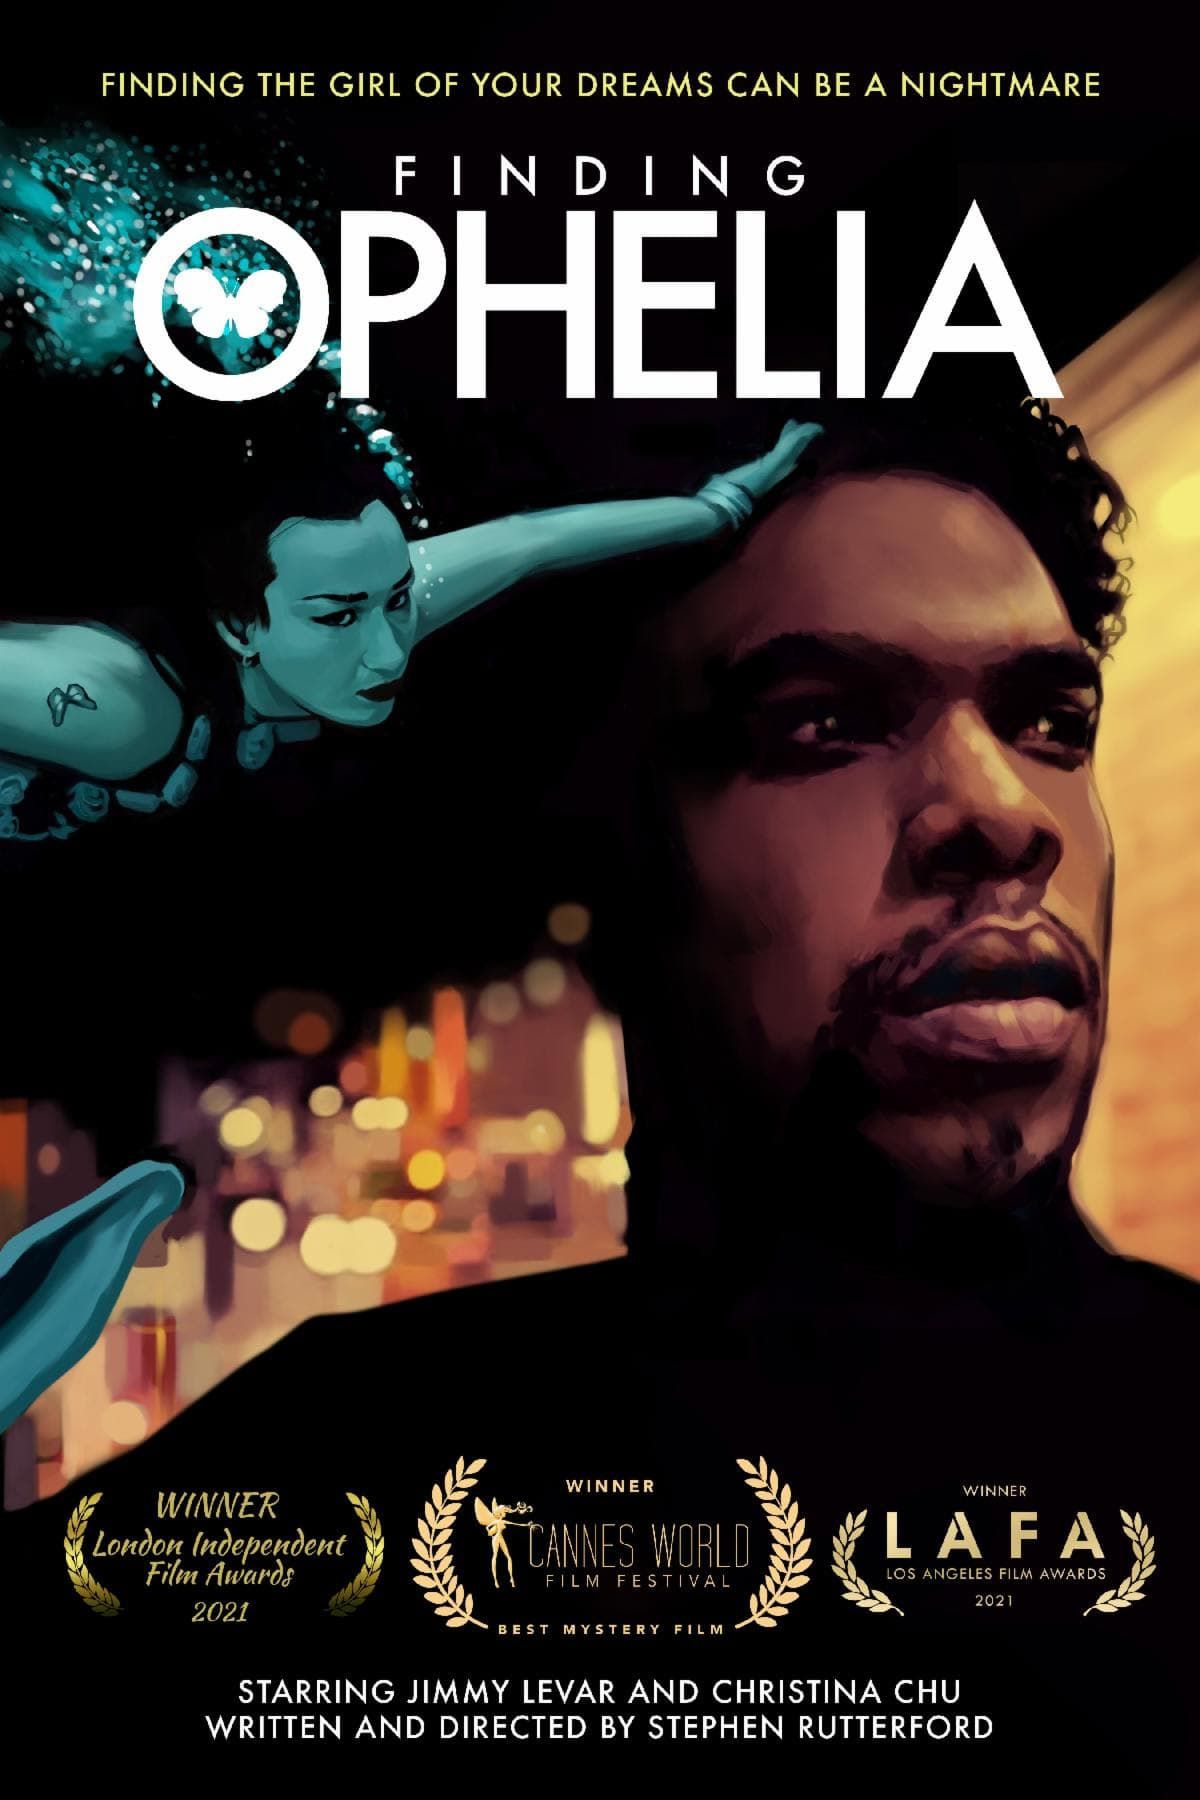 Voir Film Finding Ophelia - Film (2021) streaming VF gratuit complet